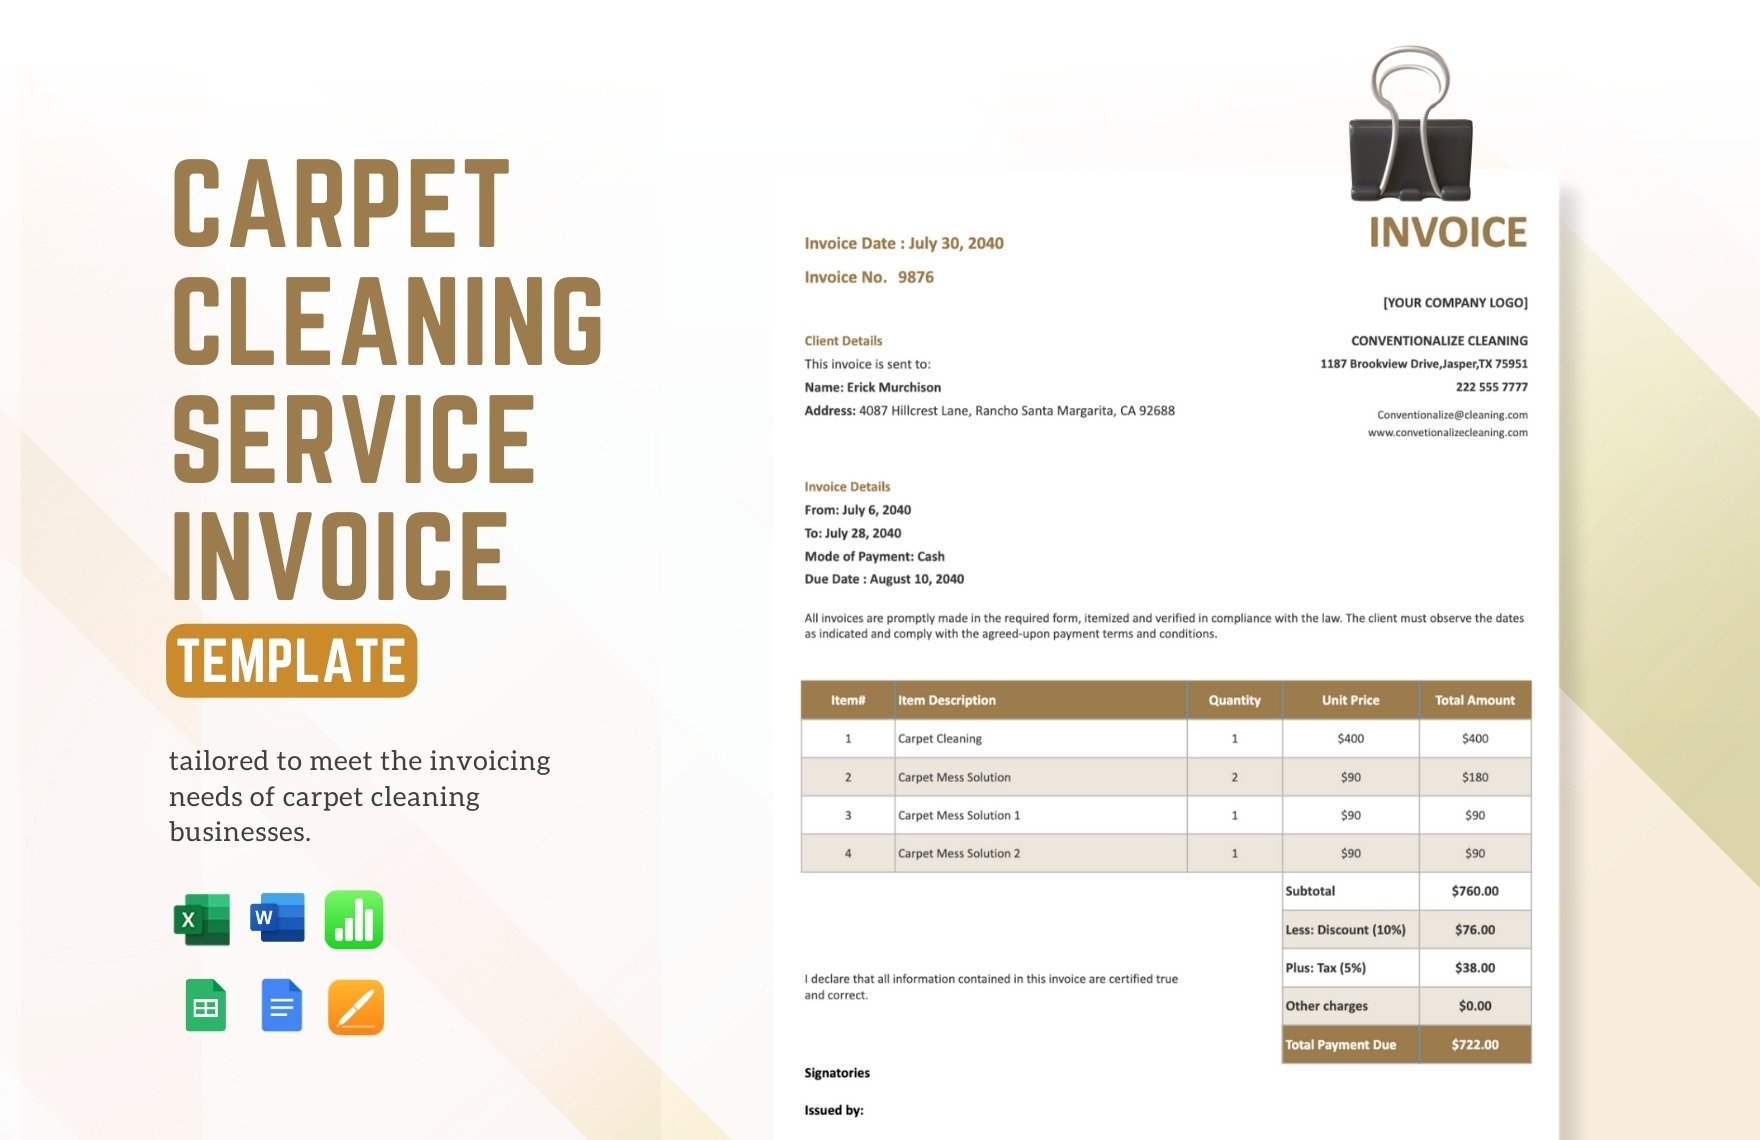 Carpet Cleaning Service Invoice Template in Word, Google Docs, Excel, Google Sheets, Apple Pages, Apple Numbers